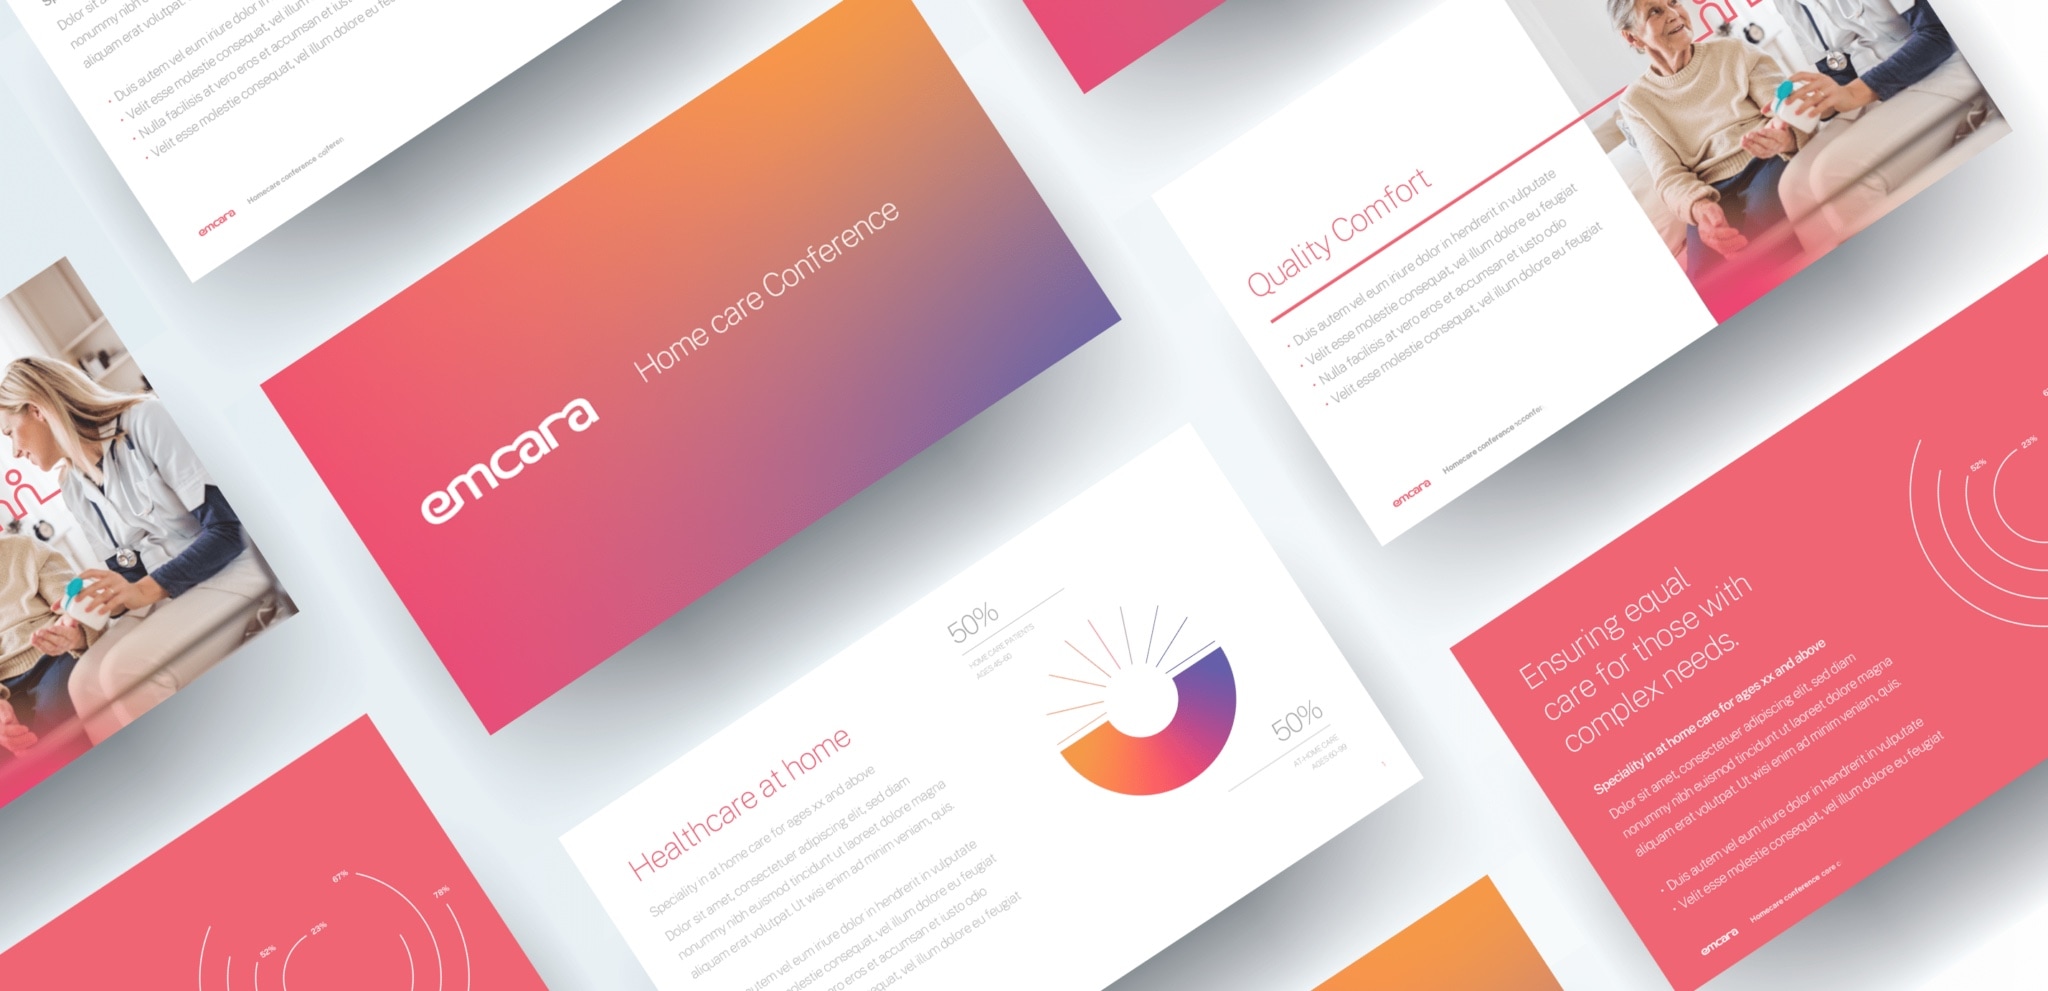 Examples of business cards designed for Emcara